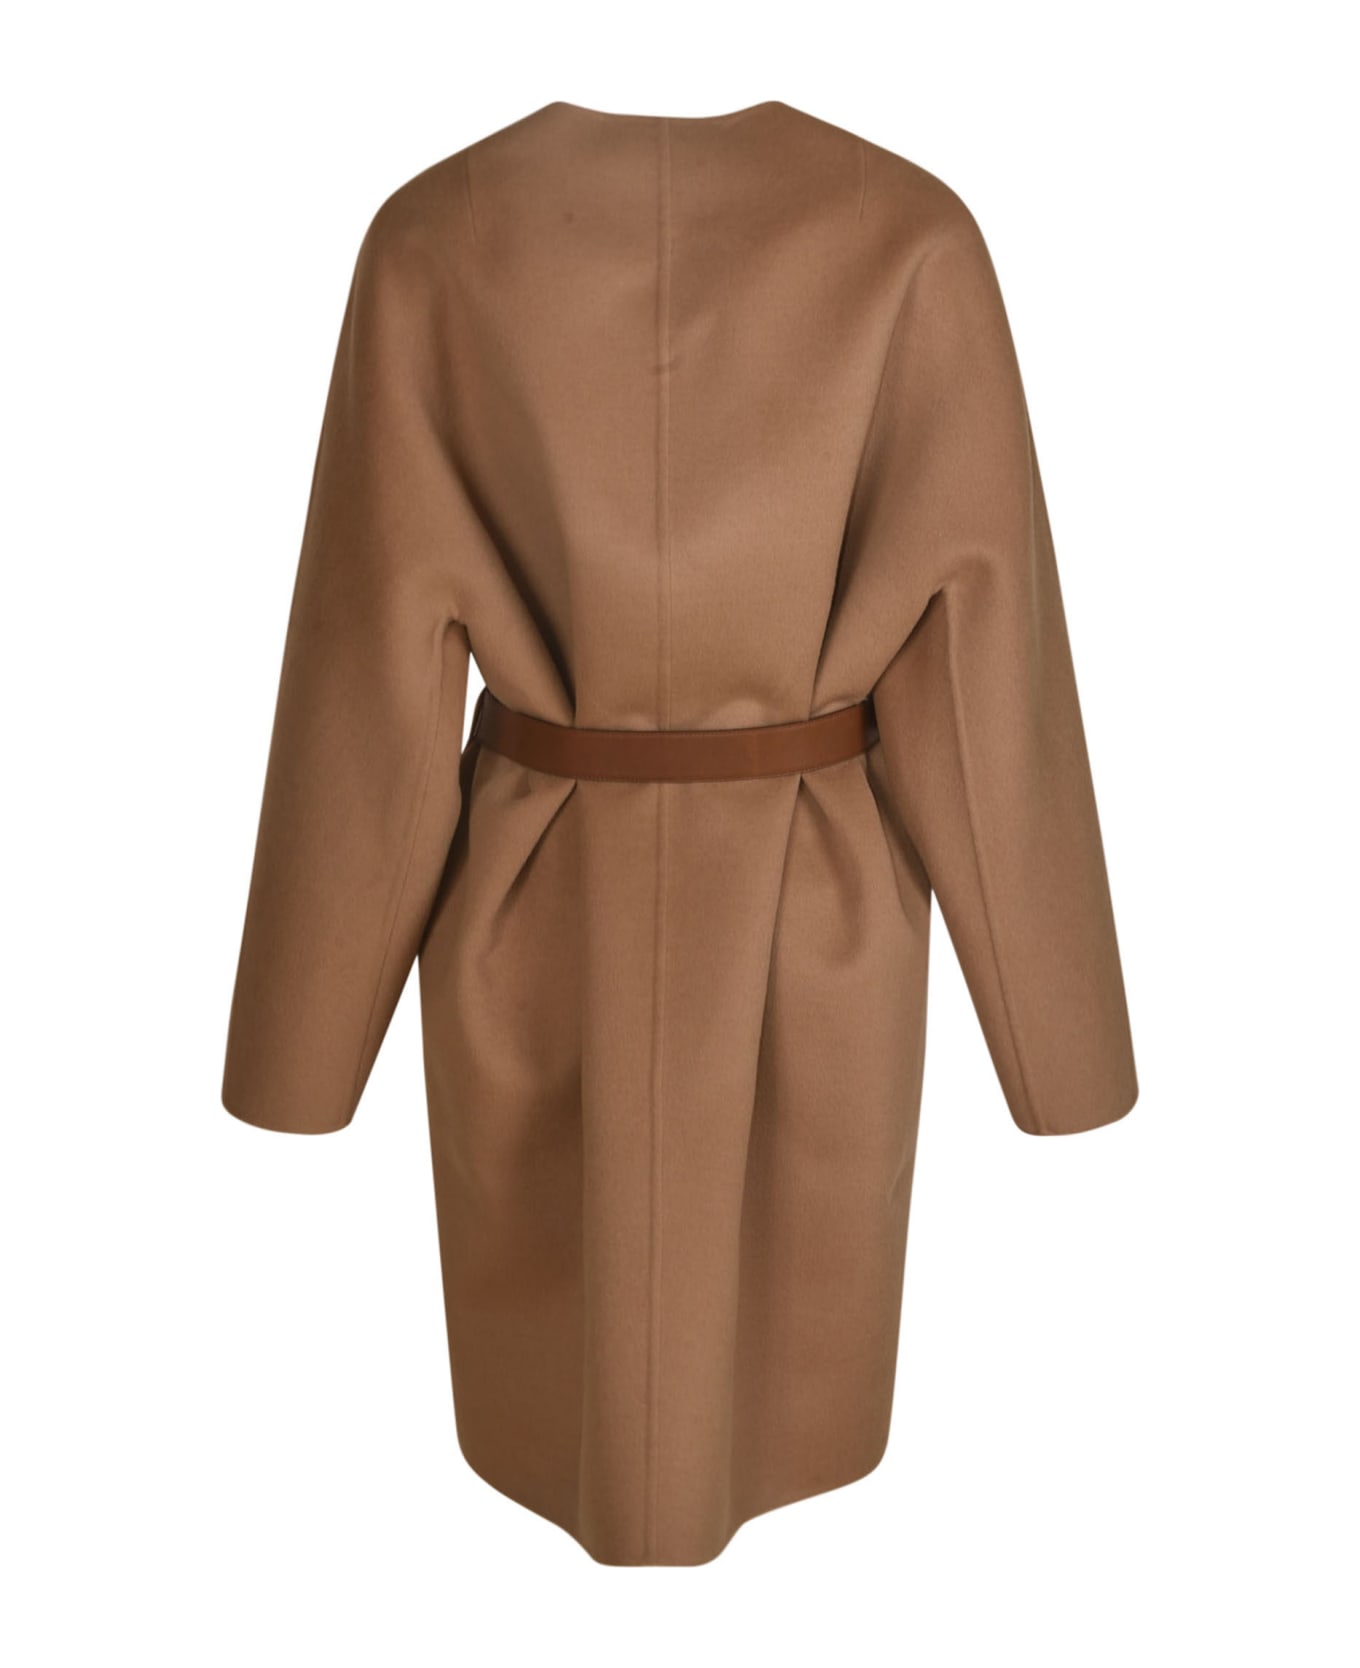 Prada Belted Buttoned Dress - Camel/White